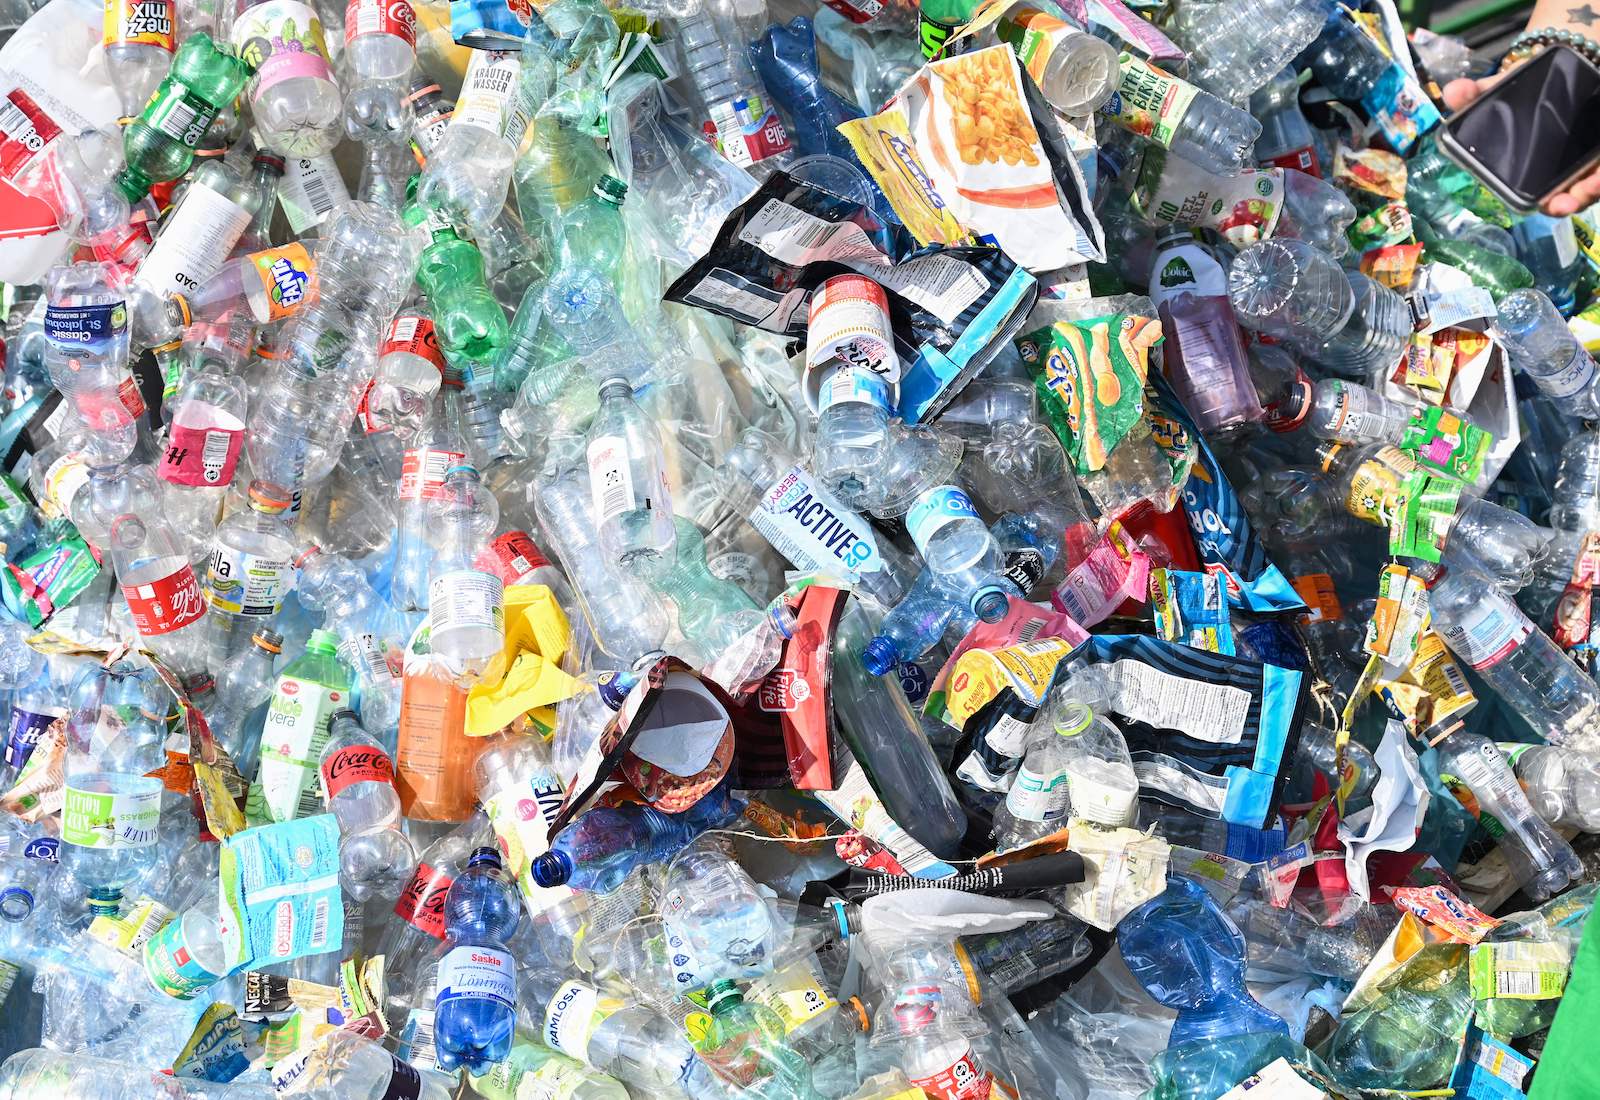 Plastic trash in a pile